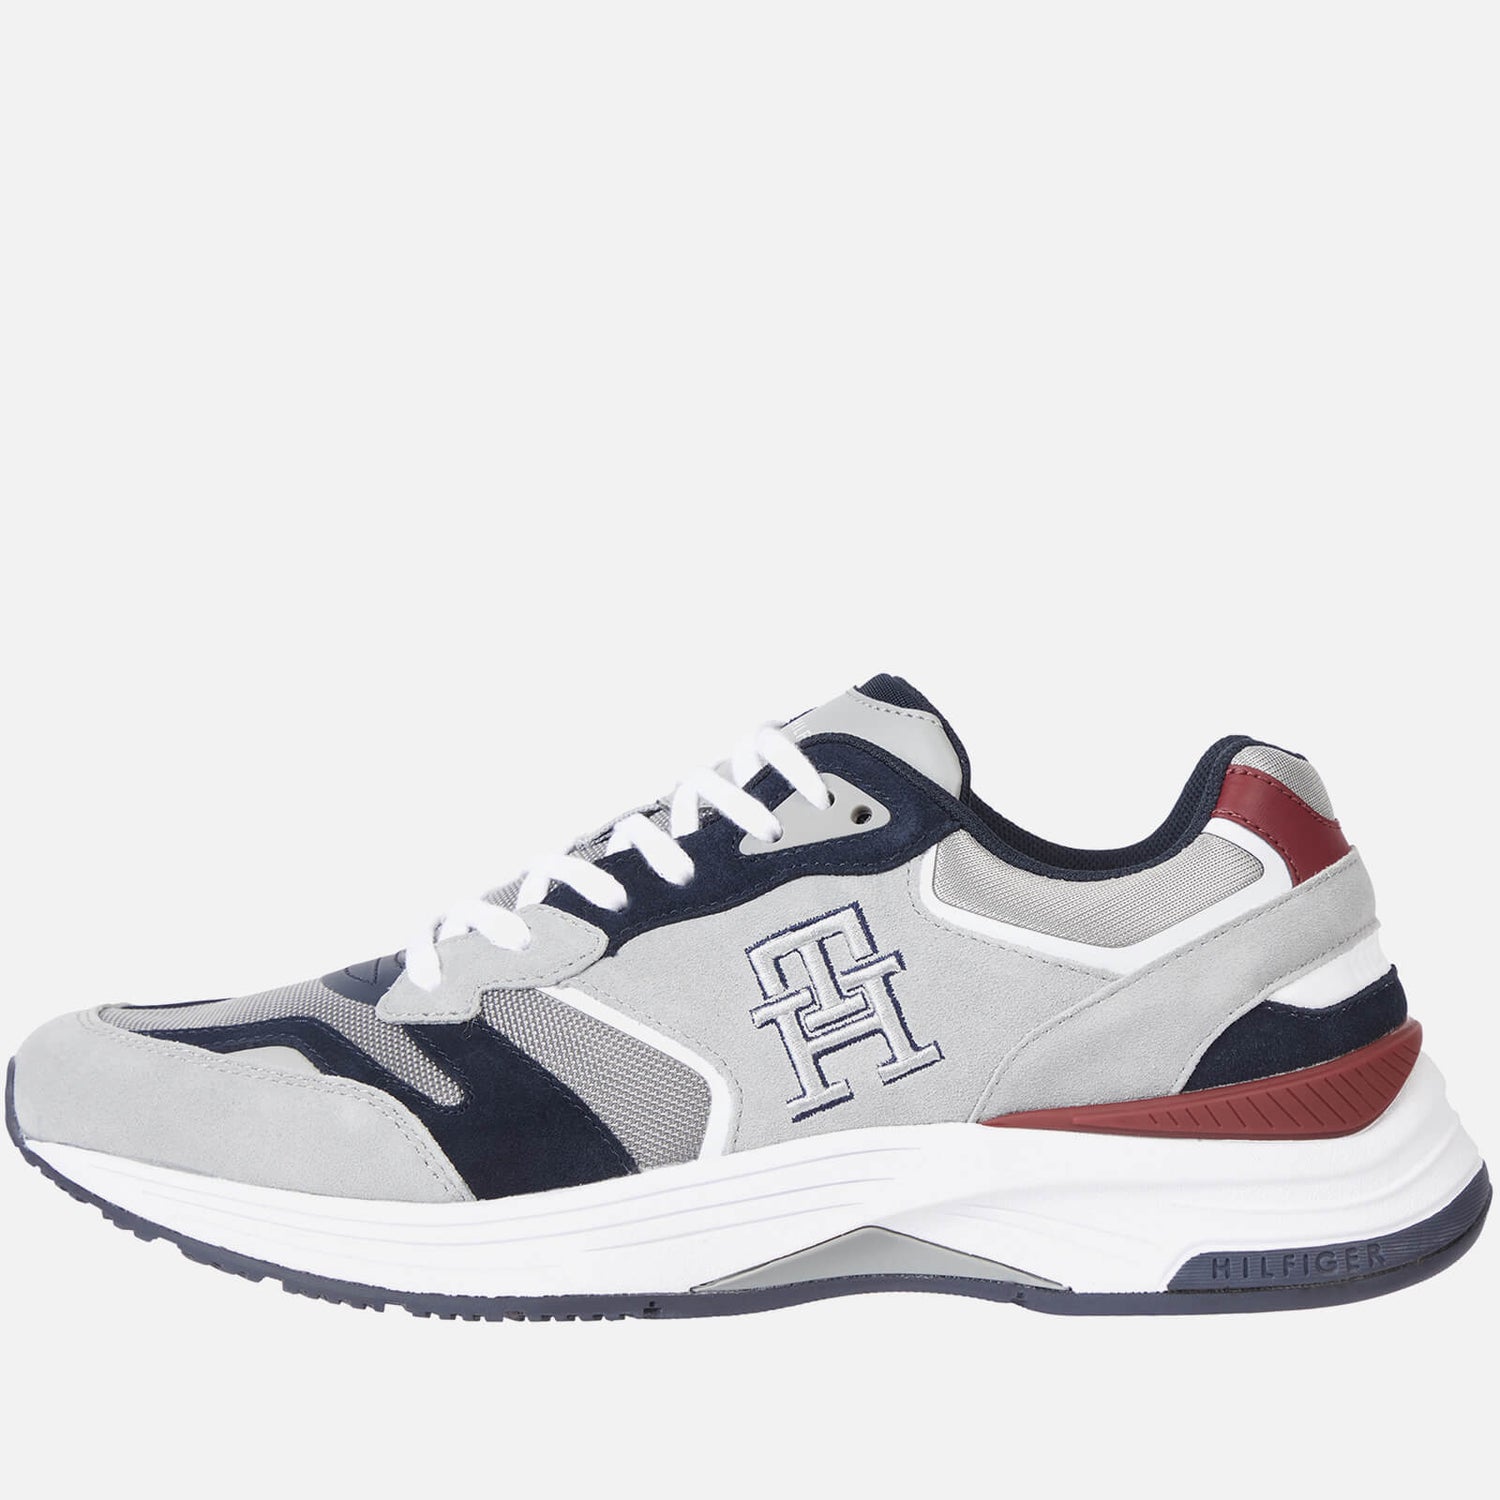 Tommy Hilfiger Prep Mix Running Style Suede Trainers - UK 7